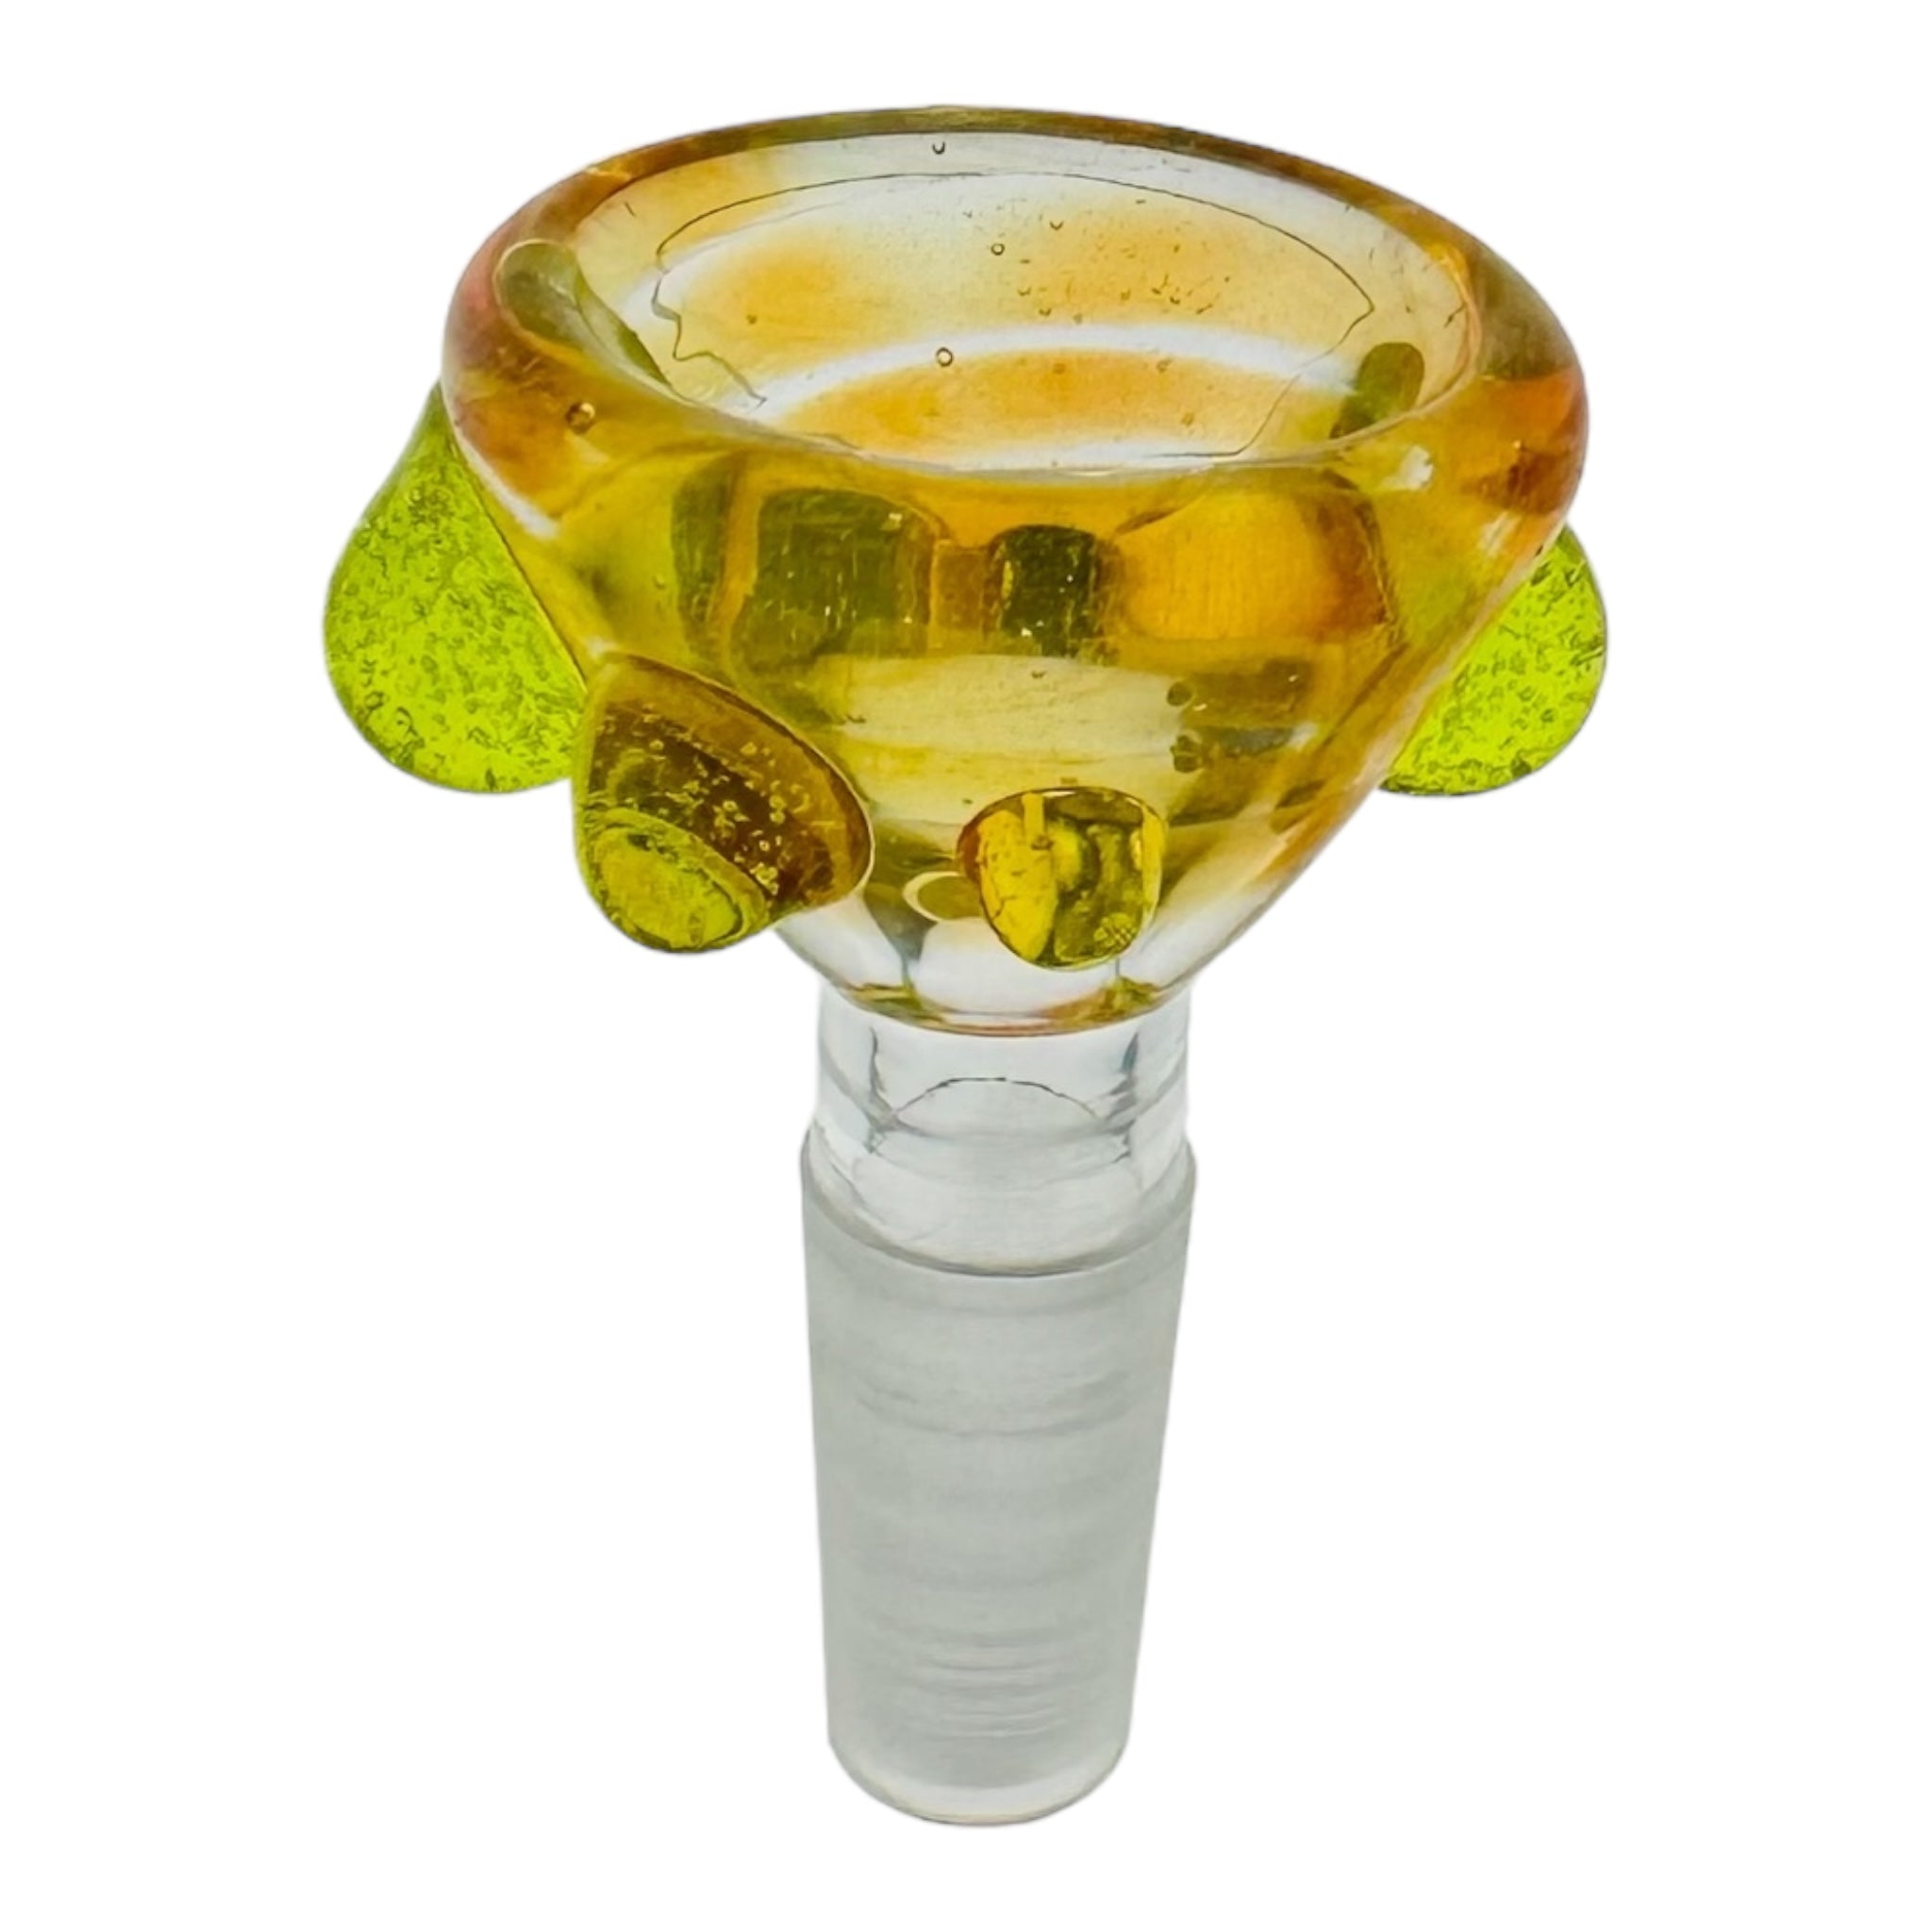 Arko Glass 10mm Bong Bowl For Weed Tuscan Orange Bowl With Hatorade Green Dots